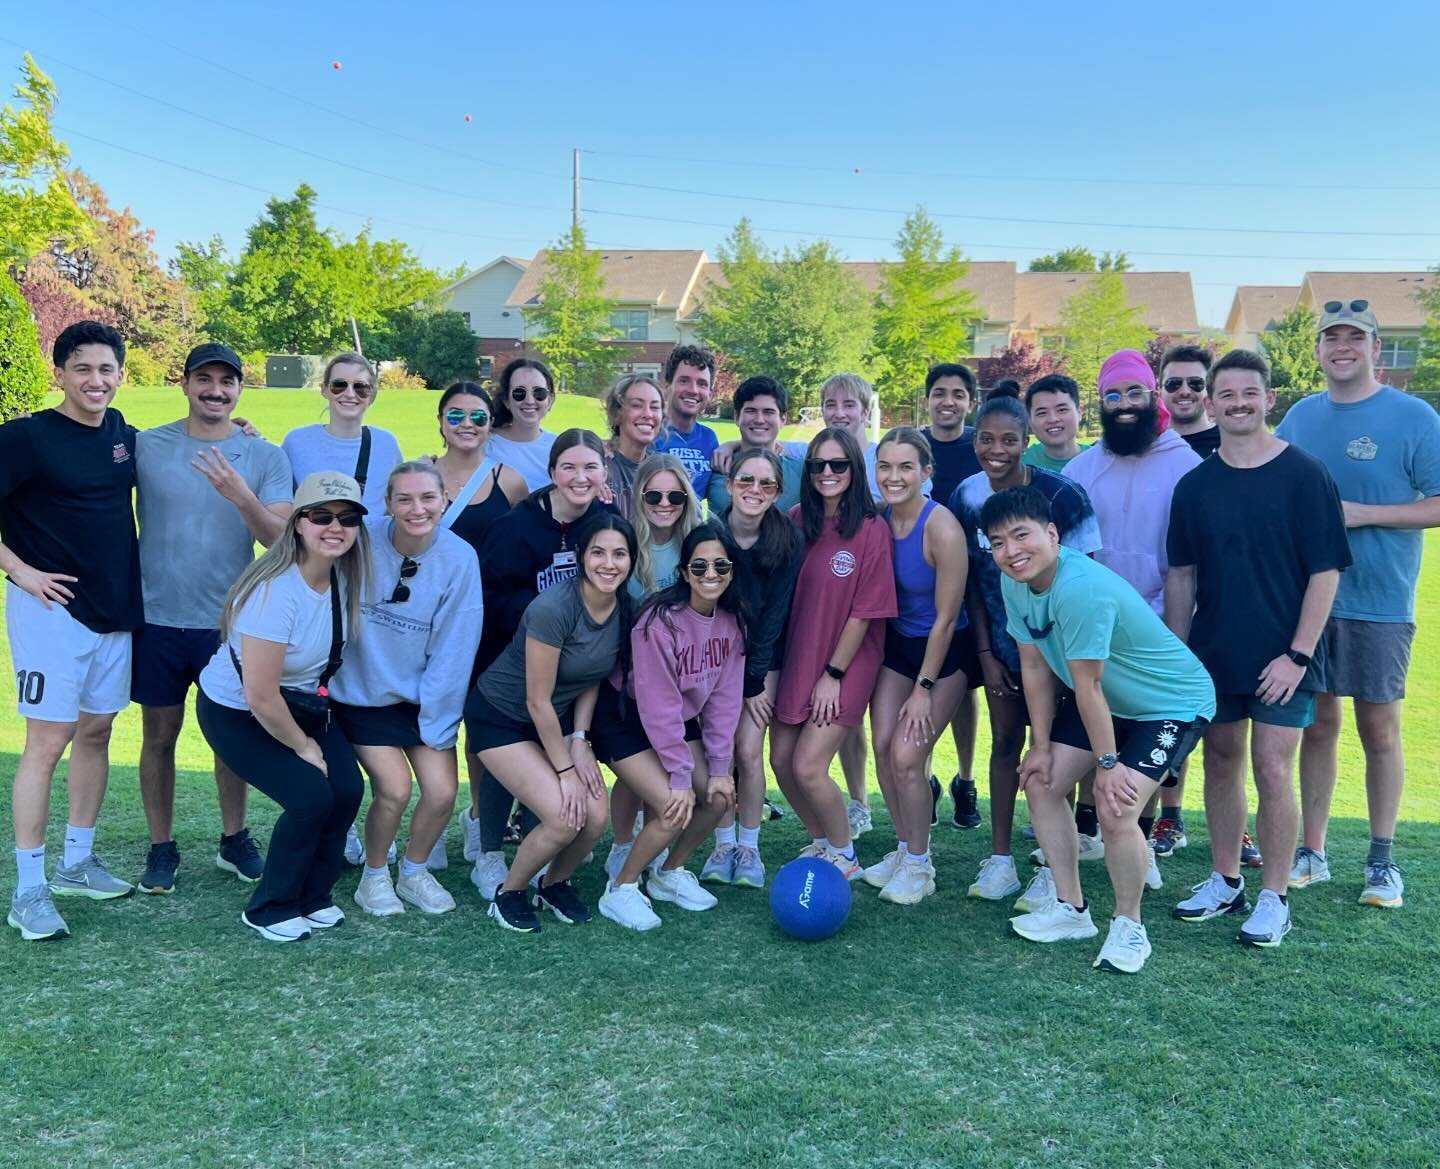 ASDA/Student council kickball tournament was a success! Thanks to everyone who came out, and congrats to the DS3 team for winning!! 🦵🏼⚽️